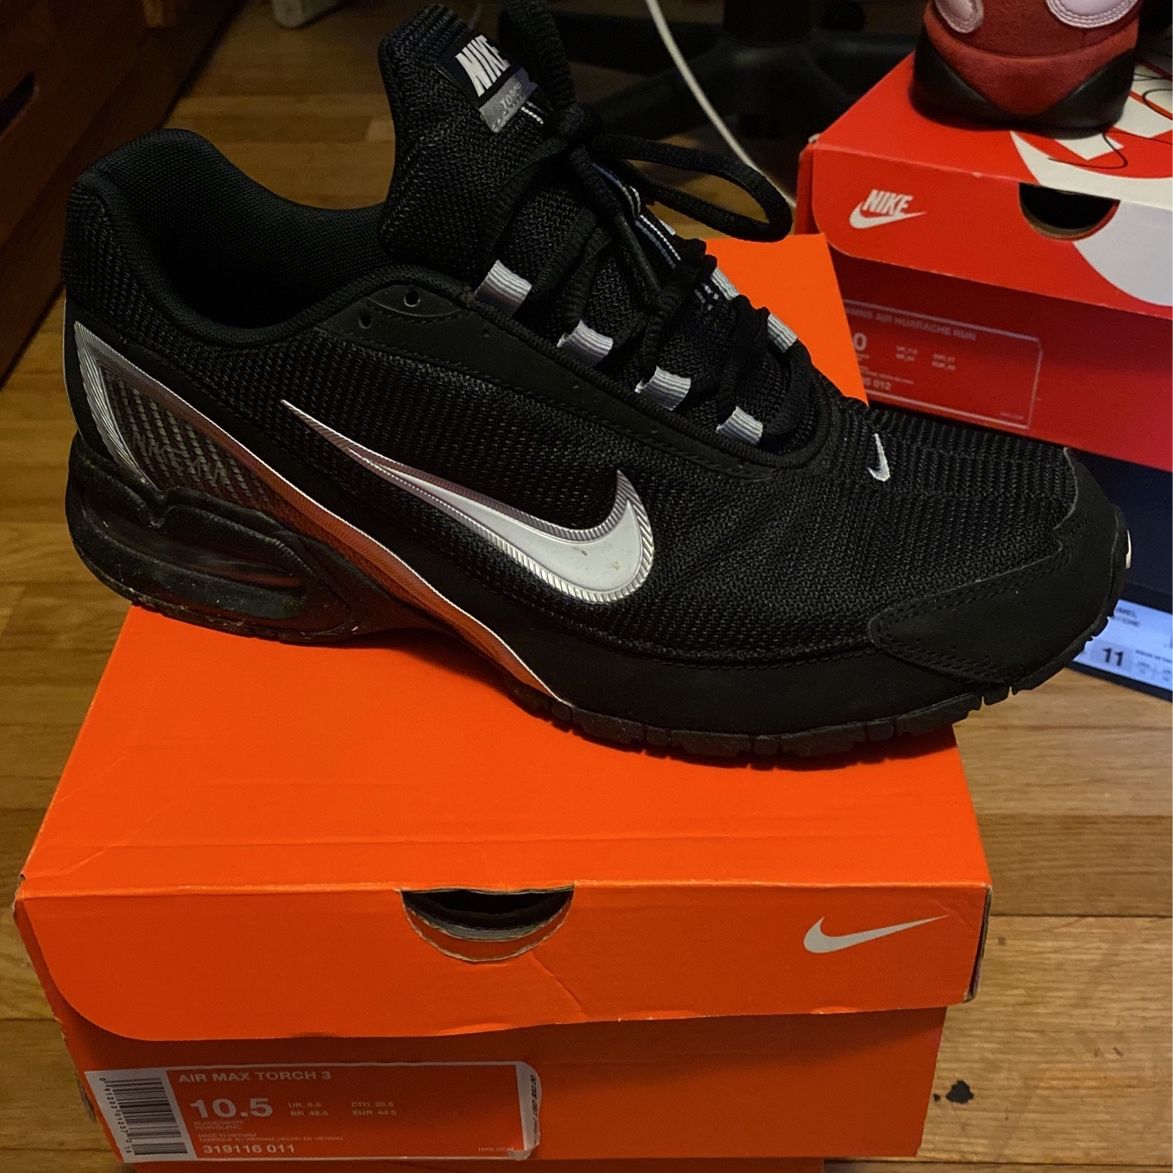 Air Max Torch 3 for MD - OfferUp